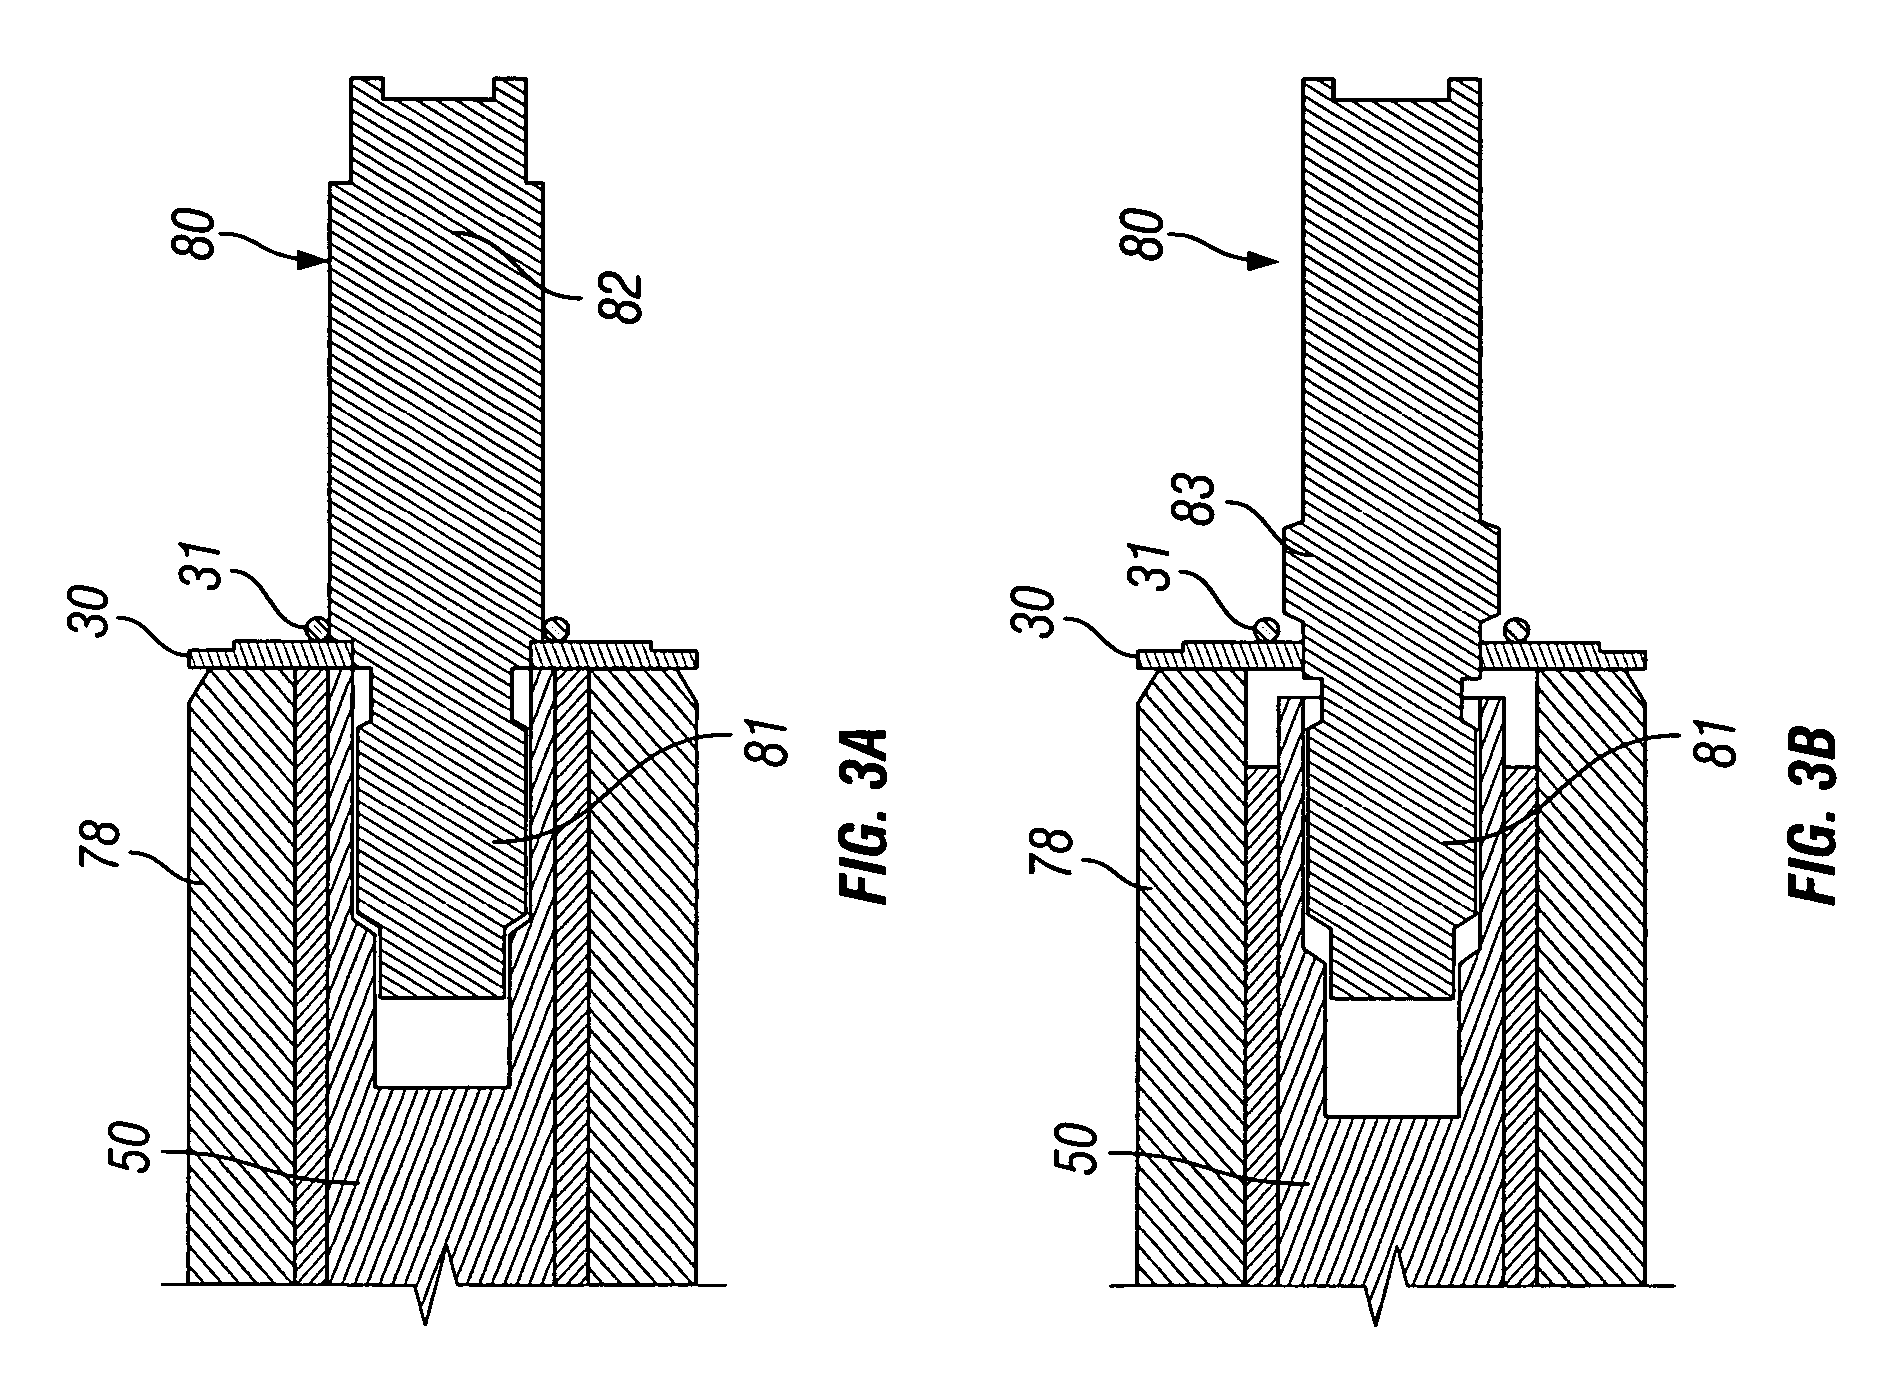 Deformable release device for use with downhole tools